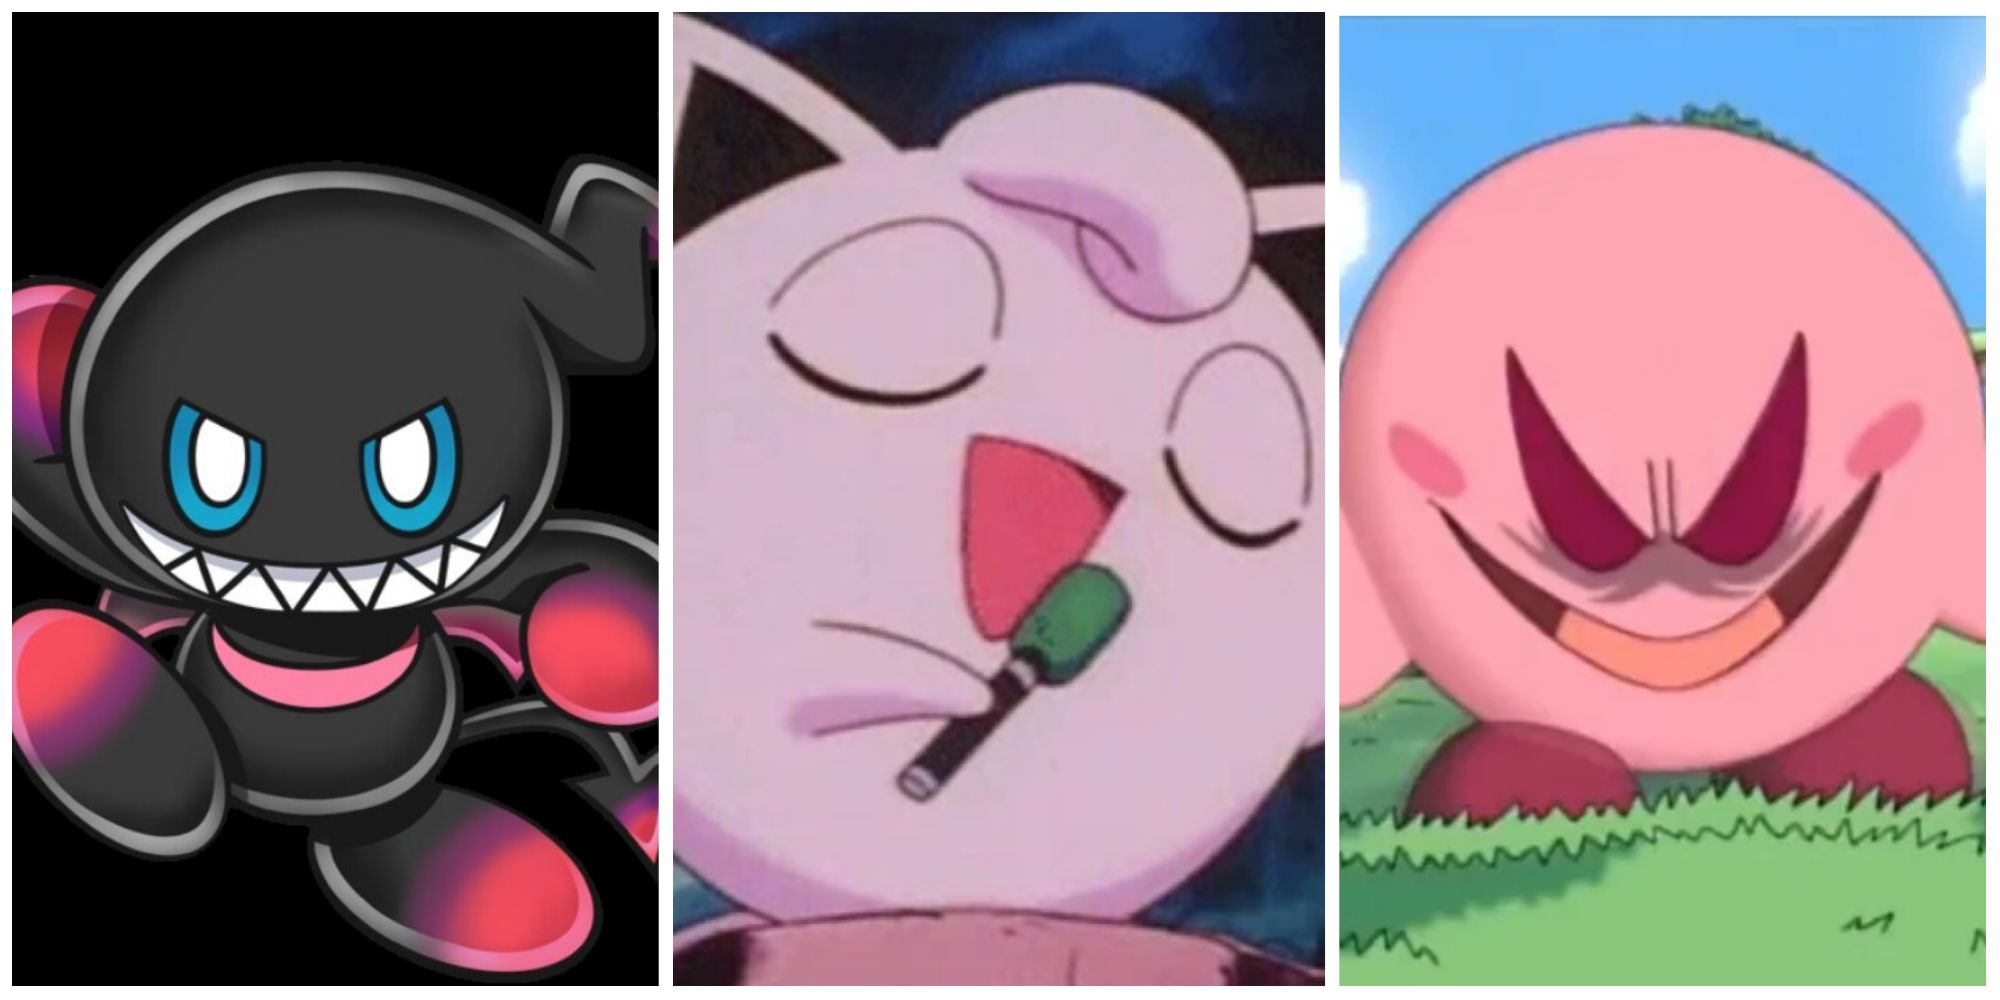 A collage of images of a Dark Chao, Jigglypuff, and Kirby